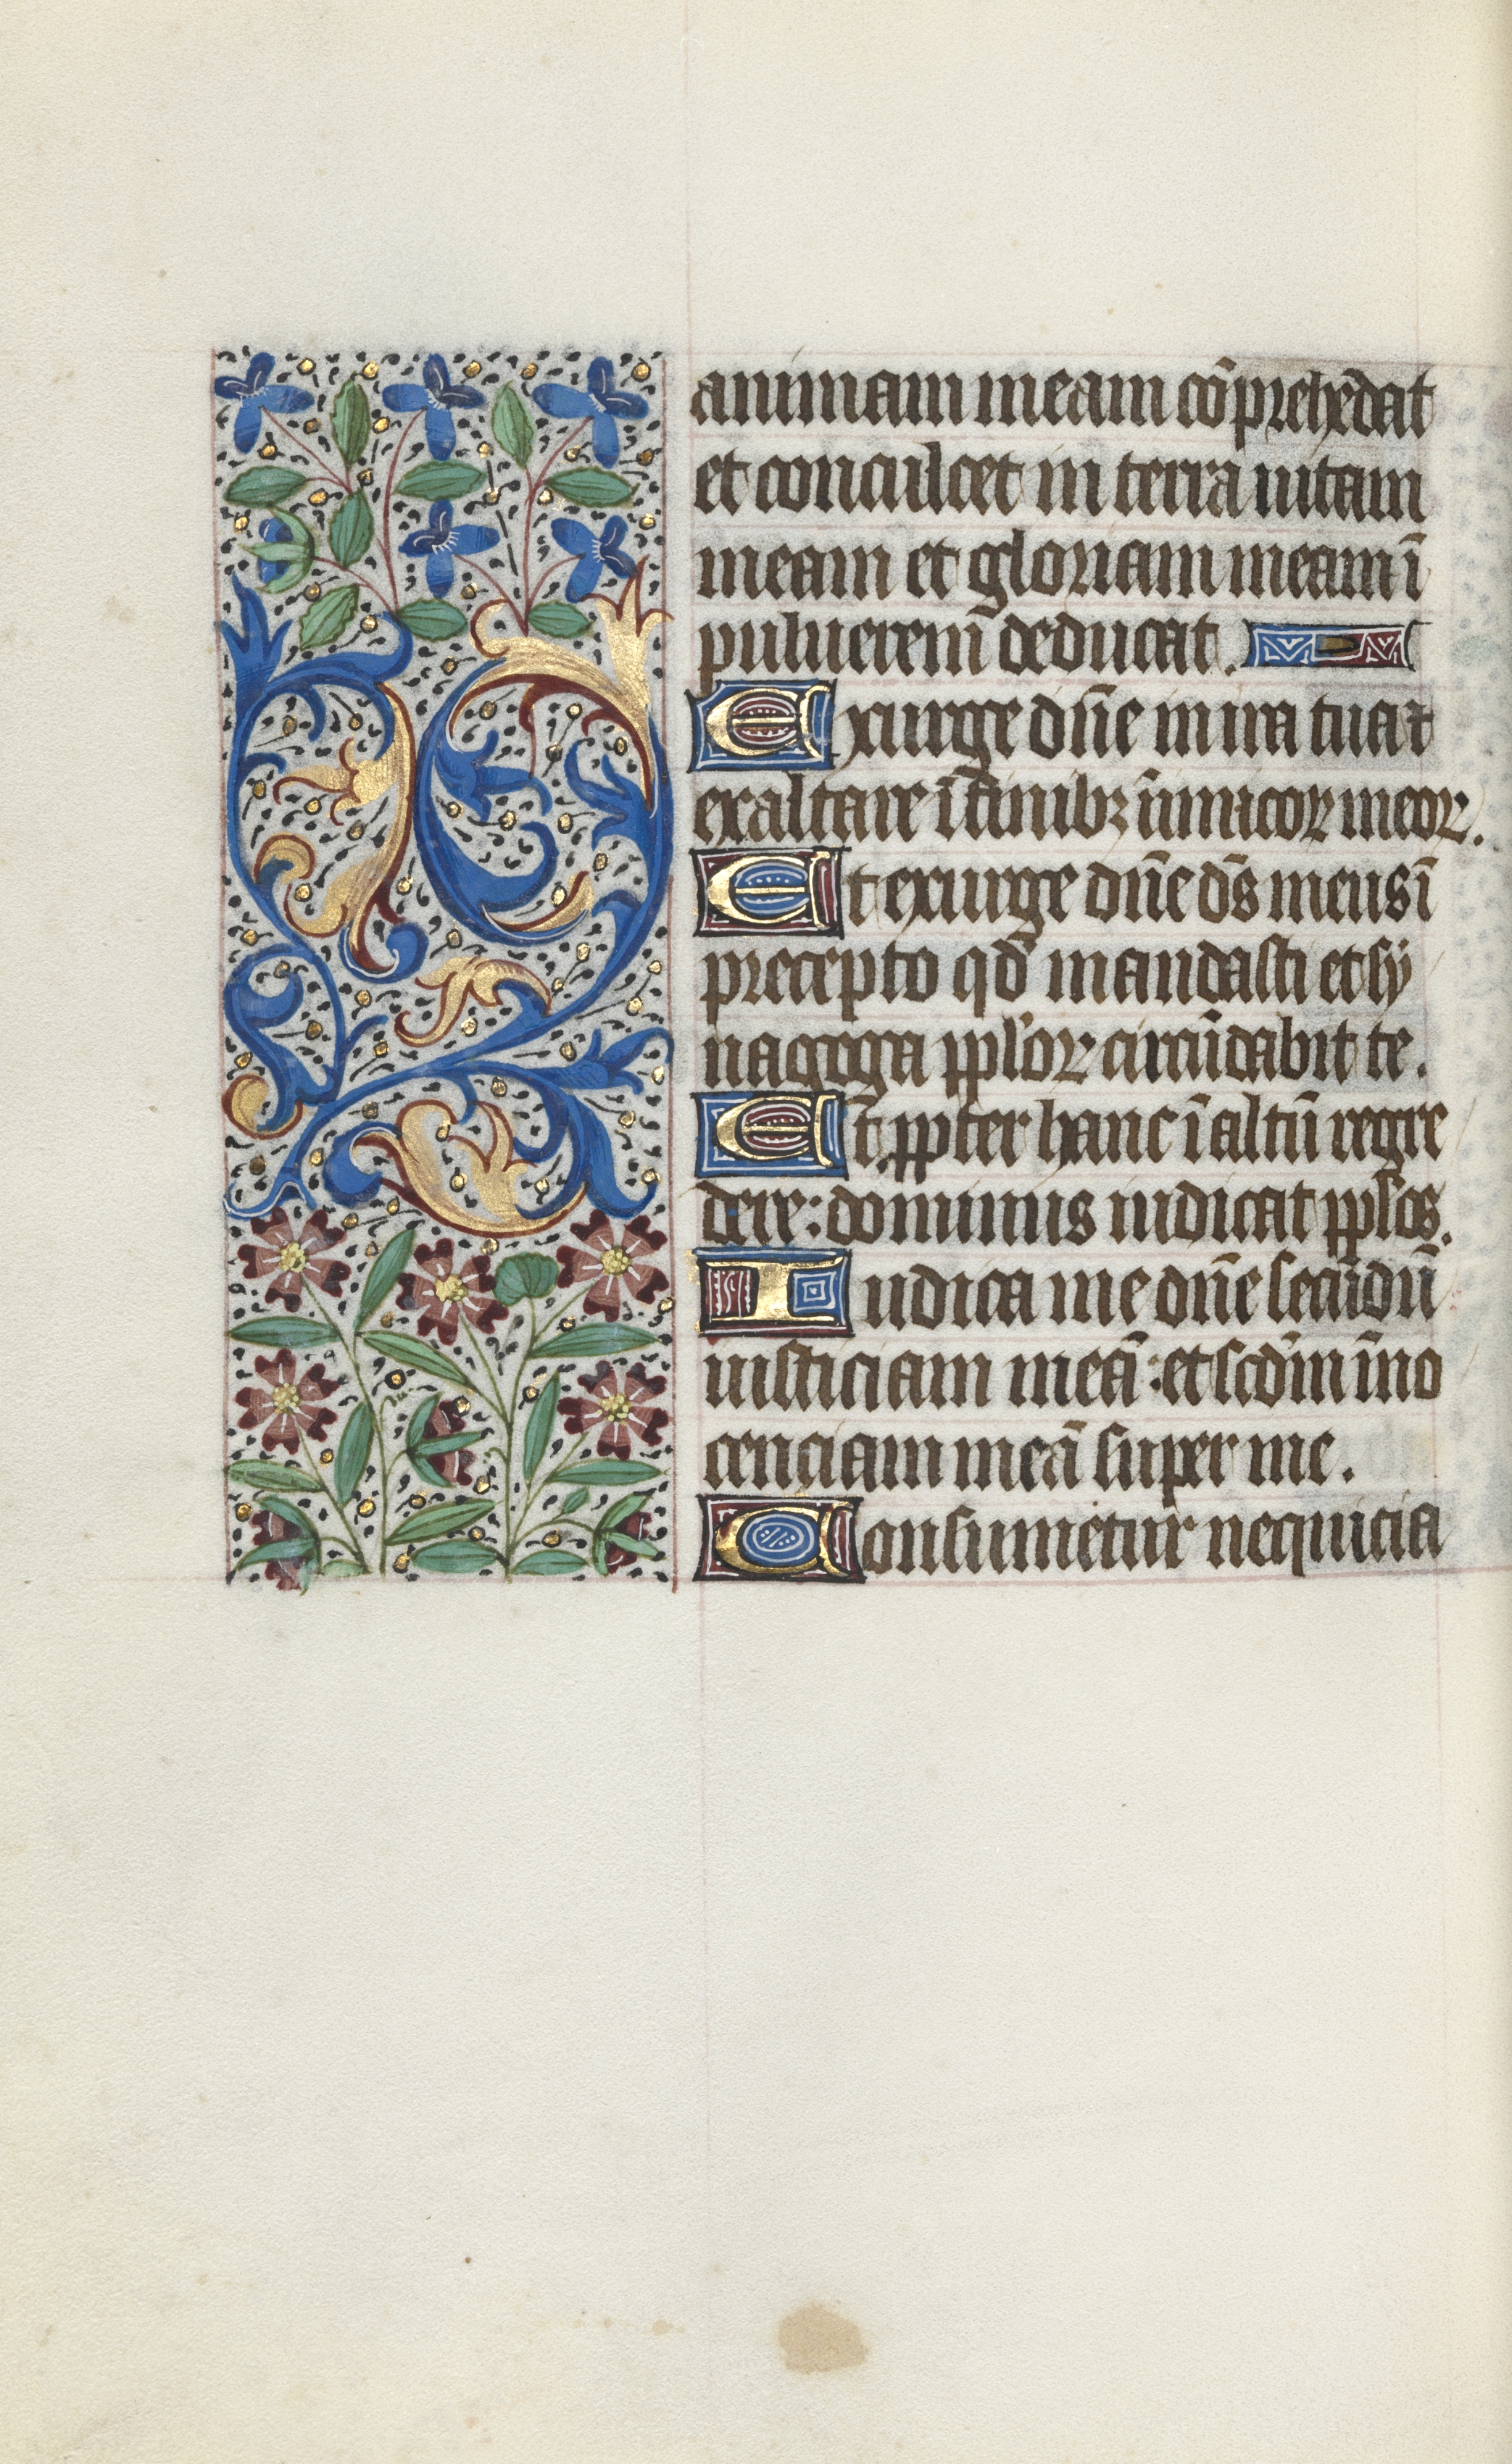 Book of Hours (Use of Rouen): fol. 113v